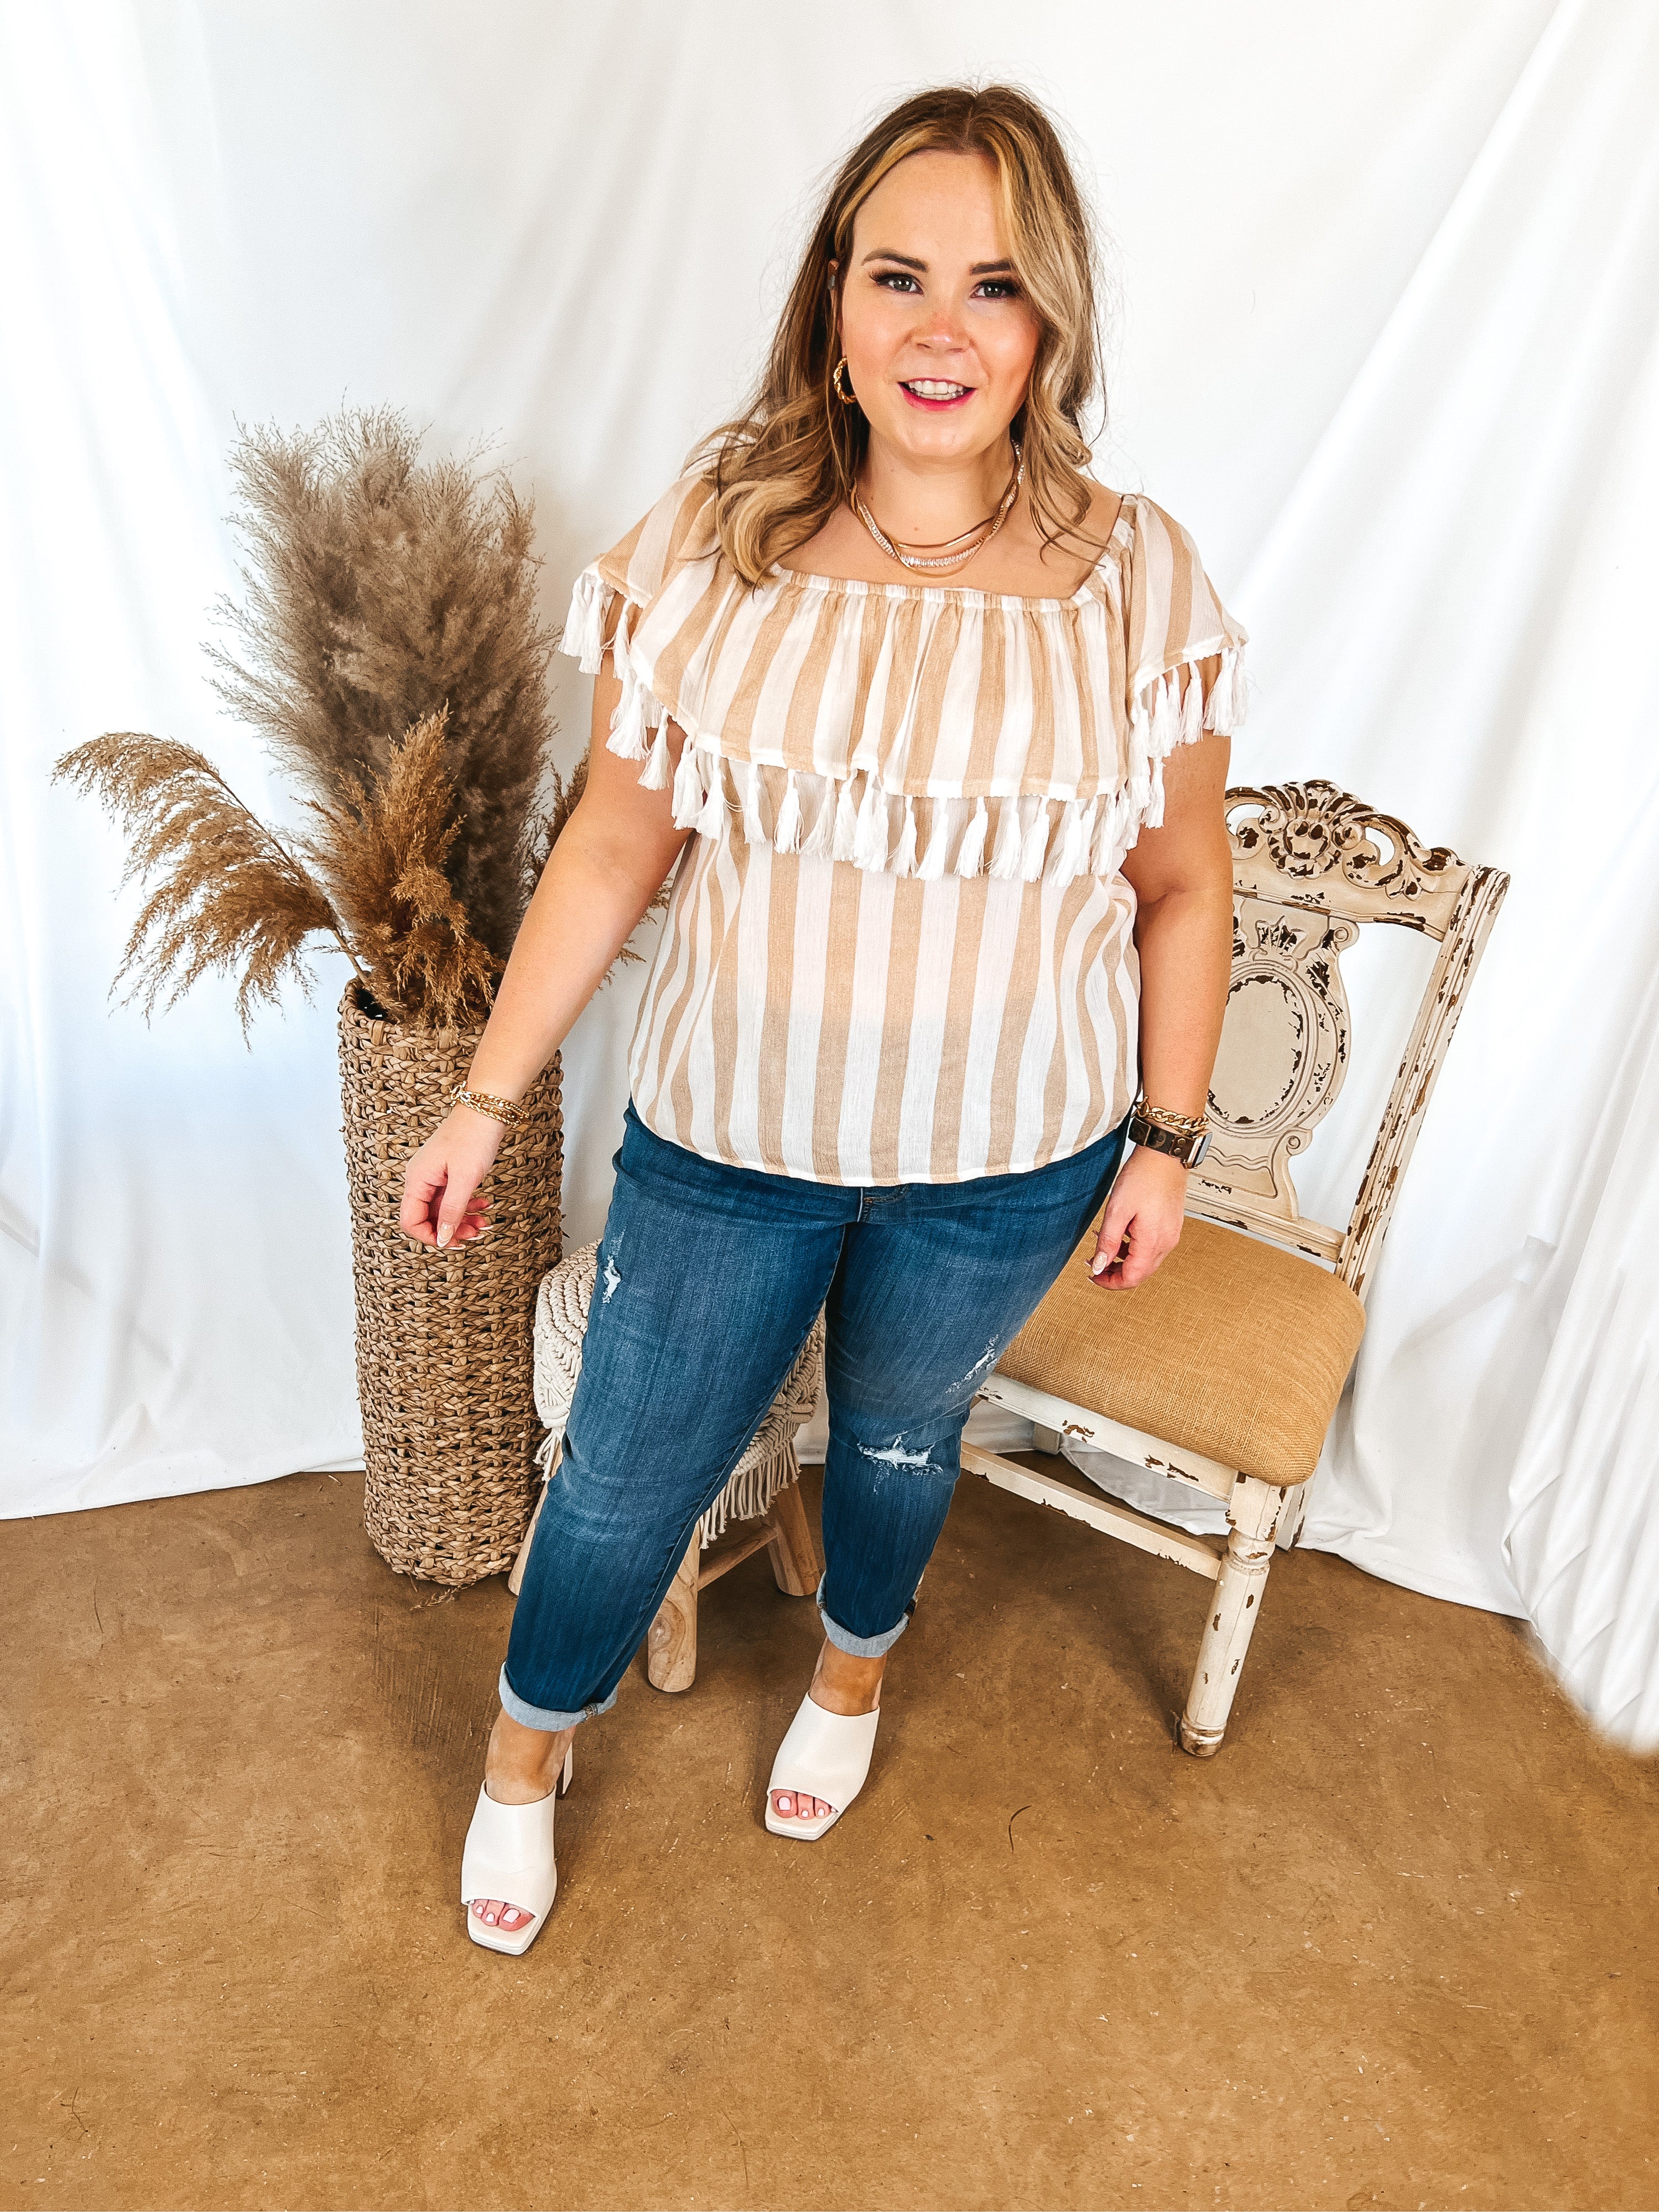 SoCal Sun Striped Off the Shoulder Top with Tassels in Ivory and Sand - Giddy Up Glamour Boutique